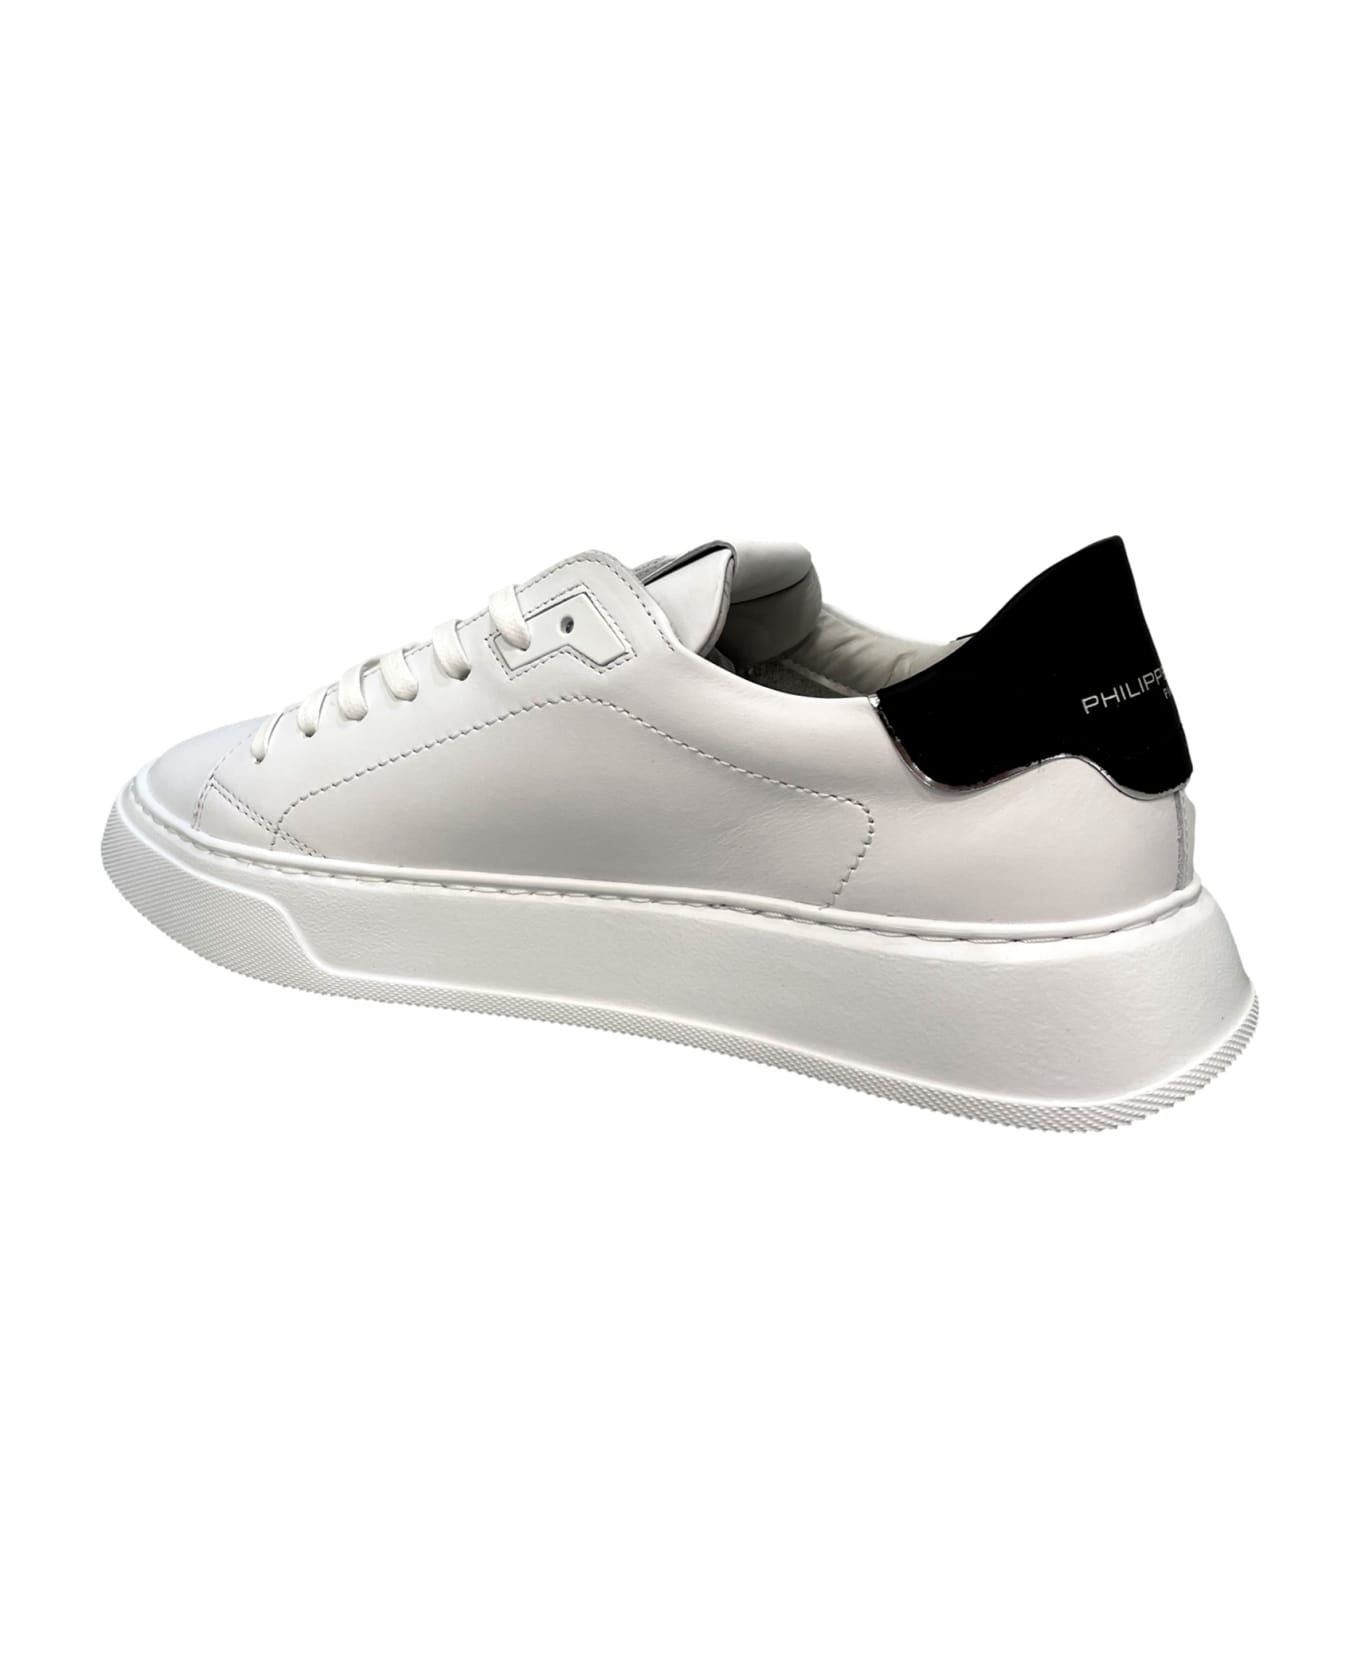 Philippe Model Temple Sneackers - White